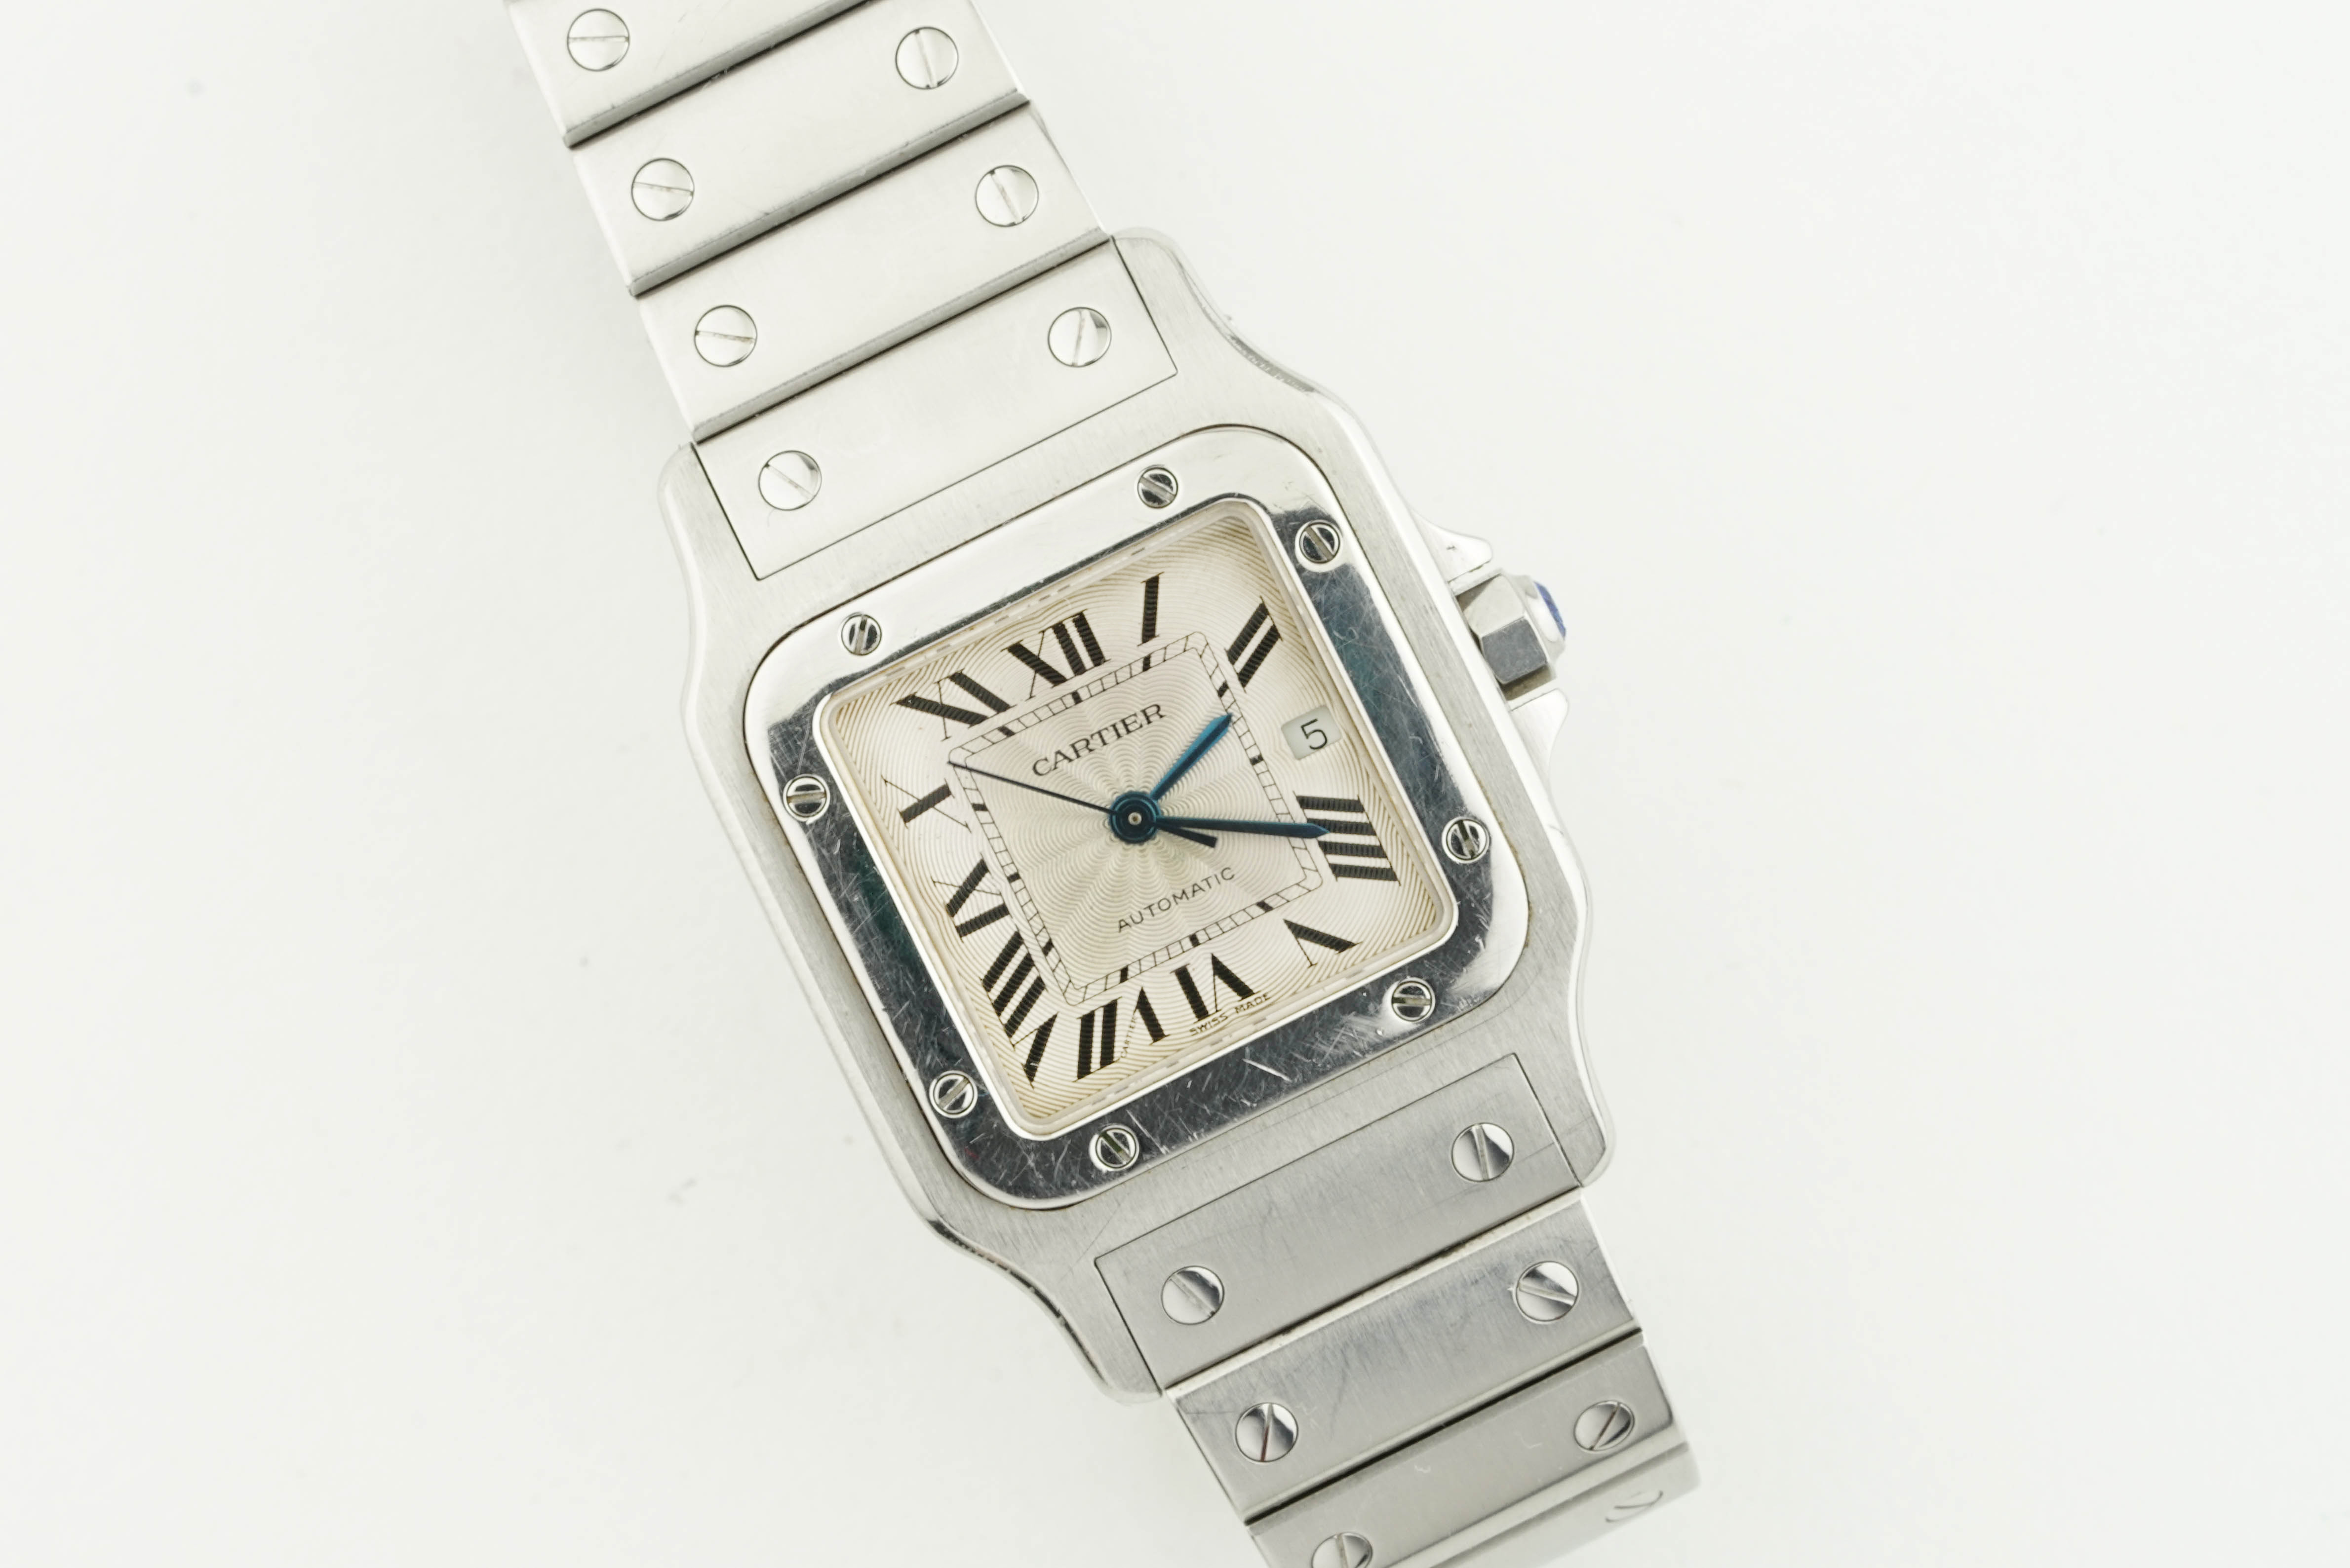 CARTIER SANTOS GALBEE AUTOMATIC W/ GUARANTEE PAPERS REF. 2319 - Image 2 of 3